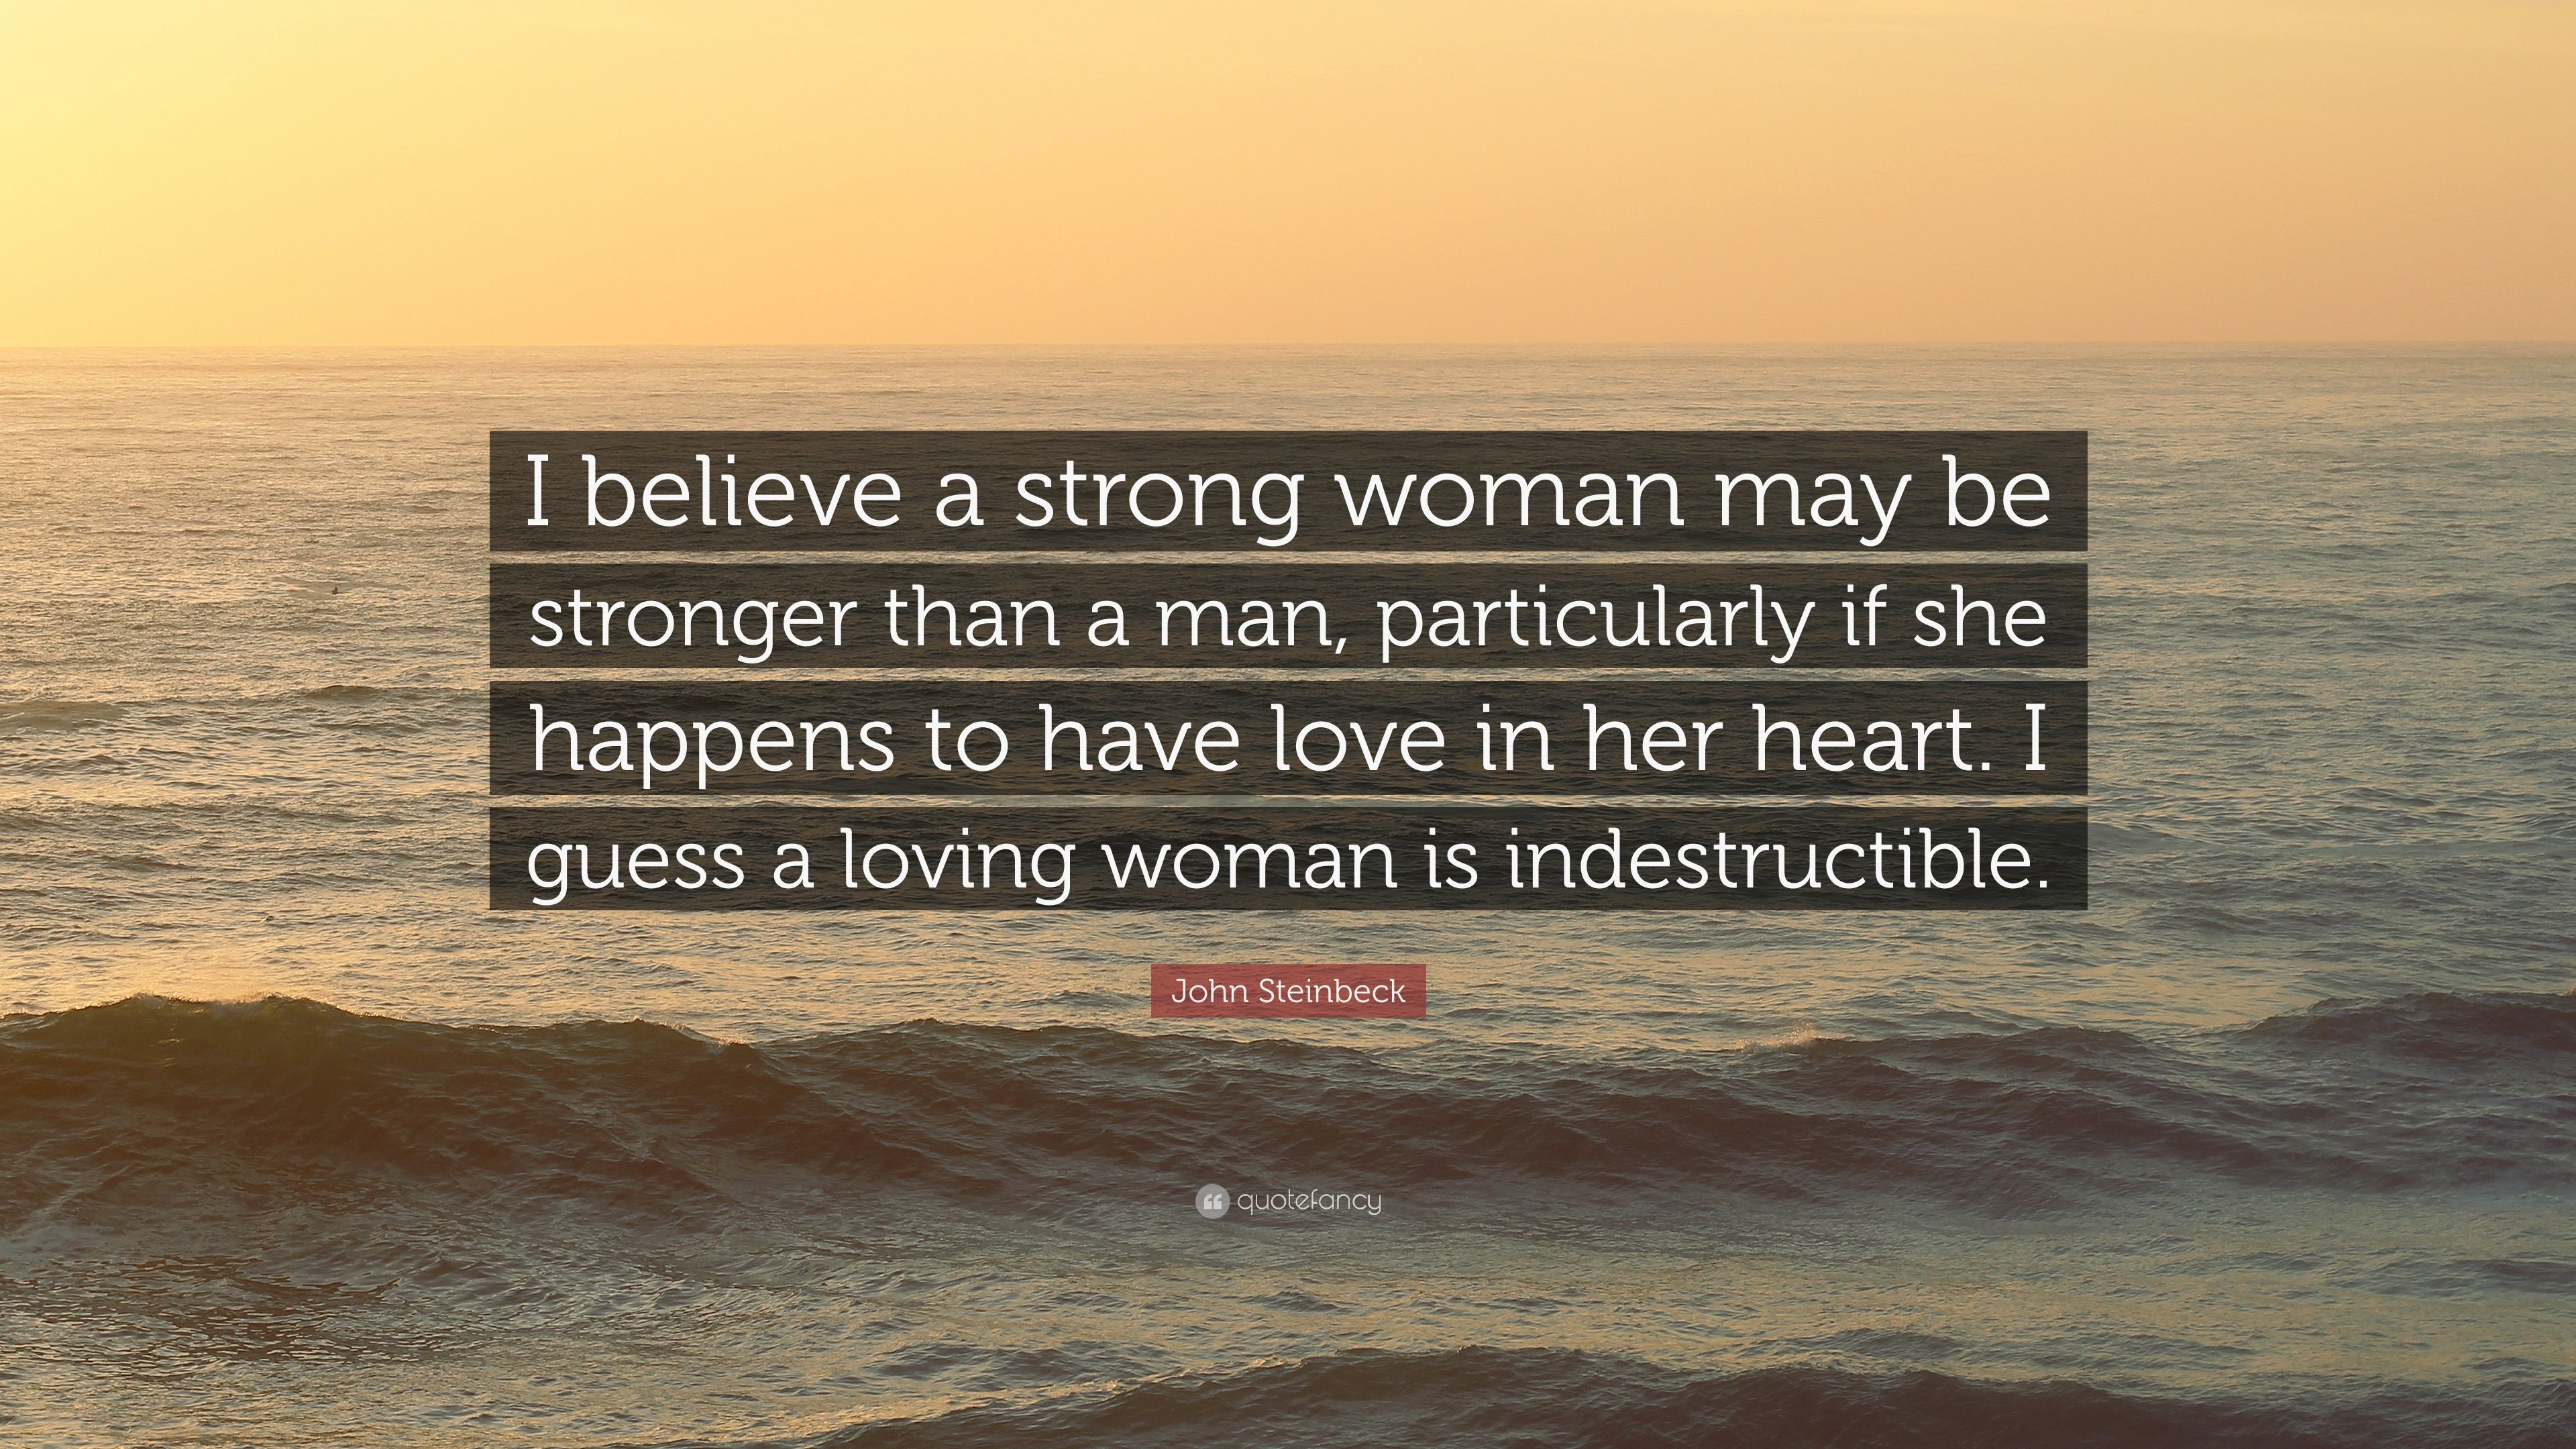 John Steinbeck Quote: “I believe a strong woman may be stronger than